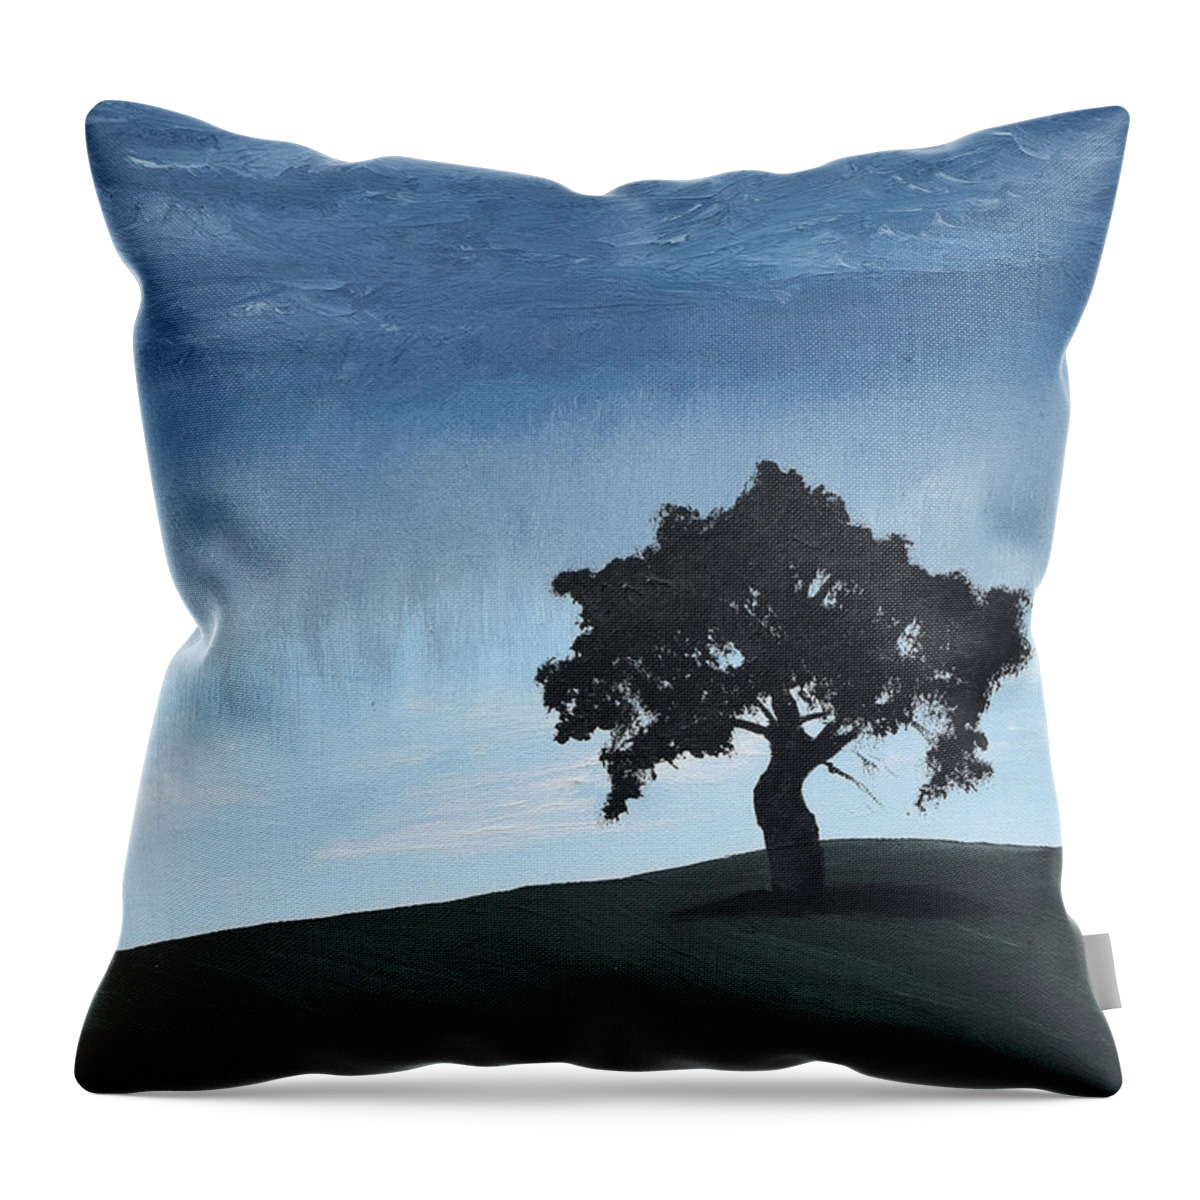 Landscape Throw Pillow featuring the painting Lone Tree by Gabrielle Munoz